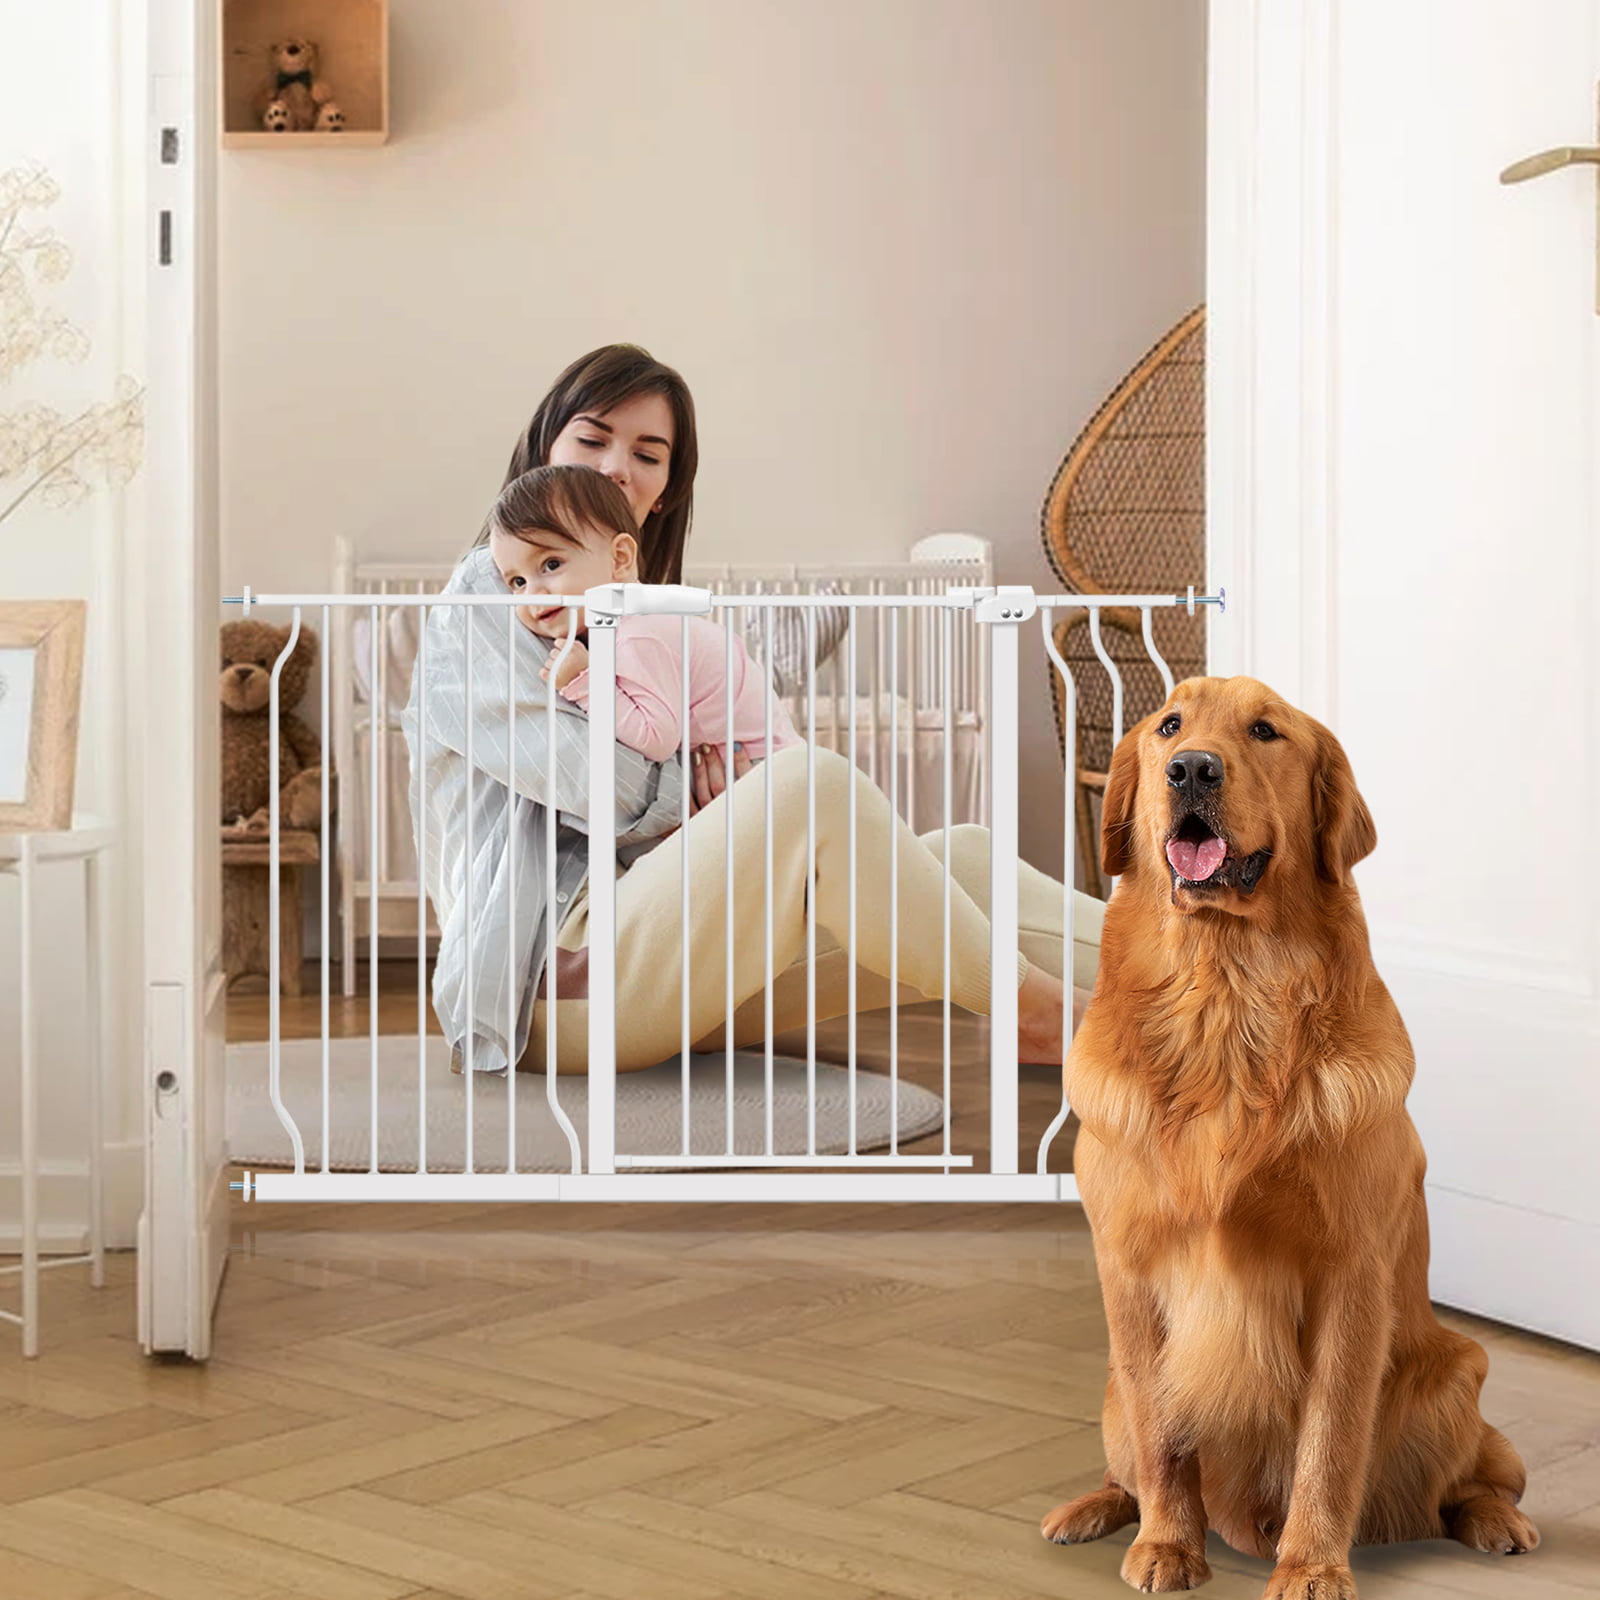 Stairs 192-Inch Super Wide Adjustable Dog Gate 2-in-1 Safety Gate Play Yard 26'' Tall Pet Gate for Hallway Indoor/Outdoor Includes 4 Pack of Wall Mounts Doorway 